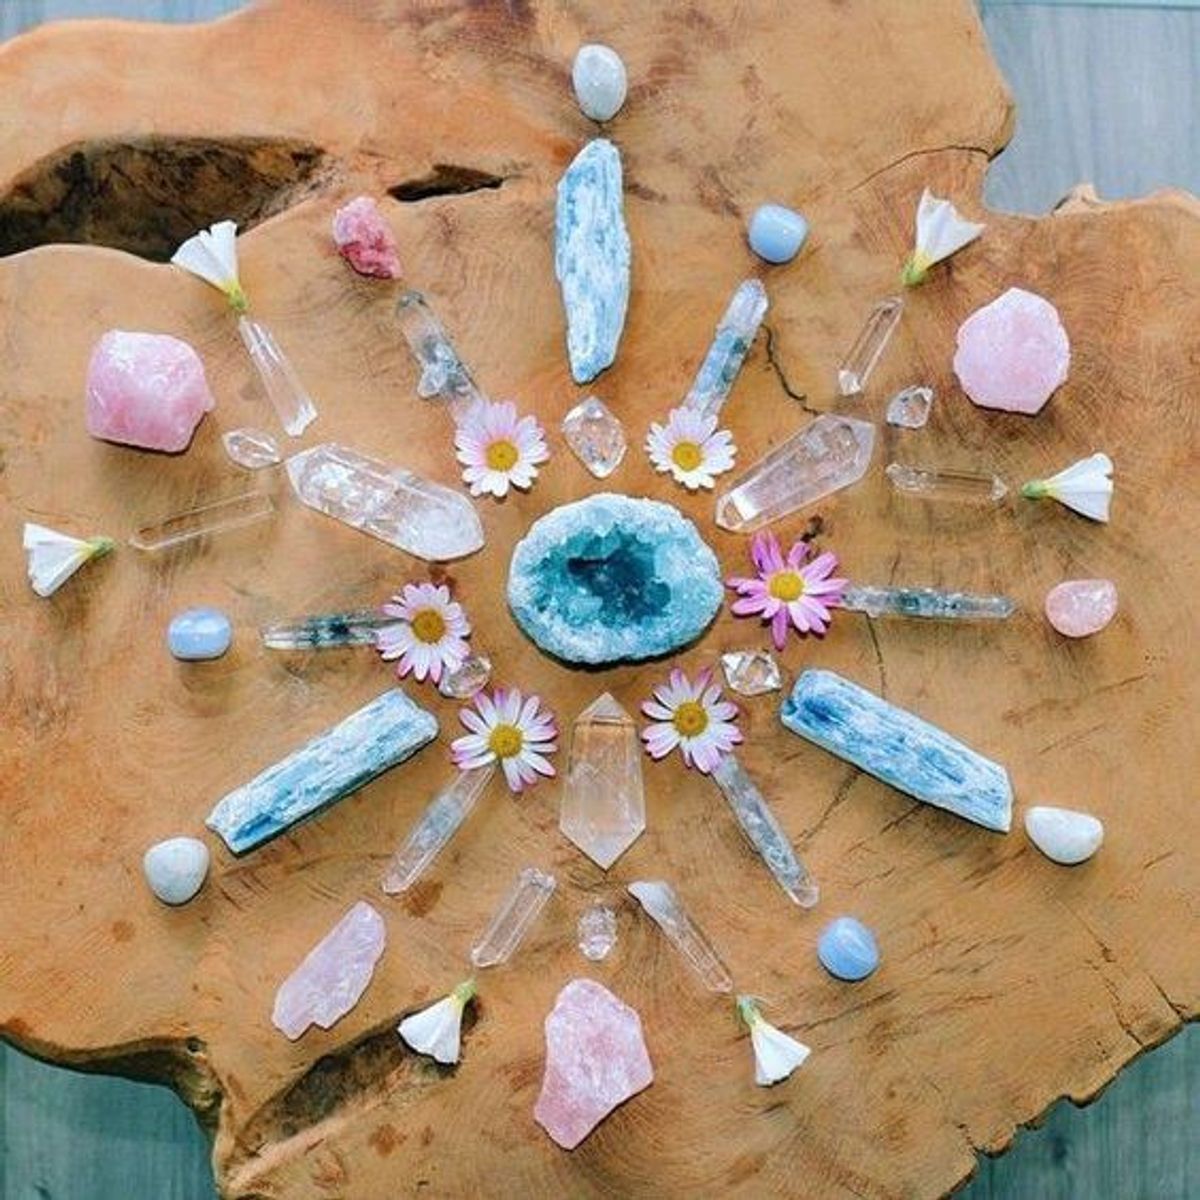 The Best Healing Stones And Crystals For Writers